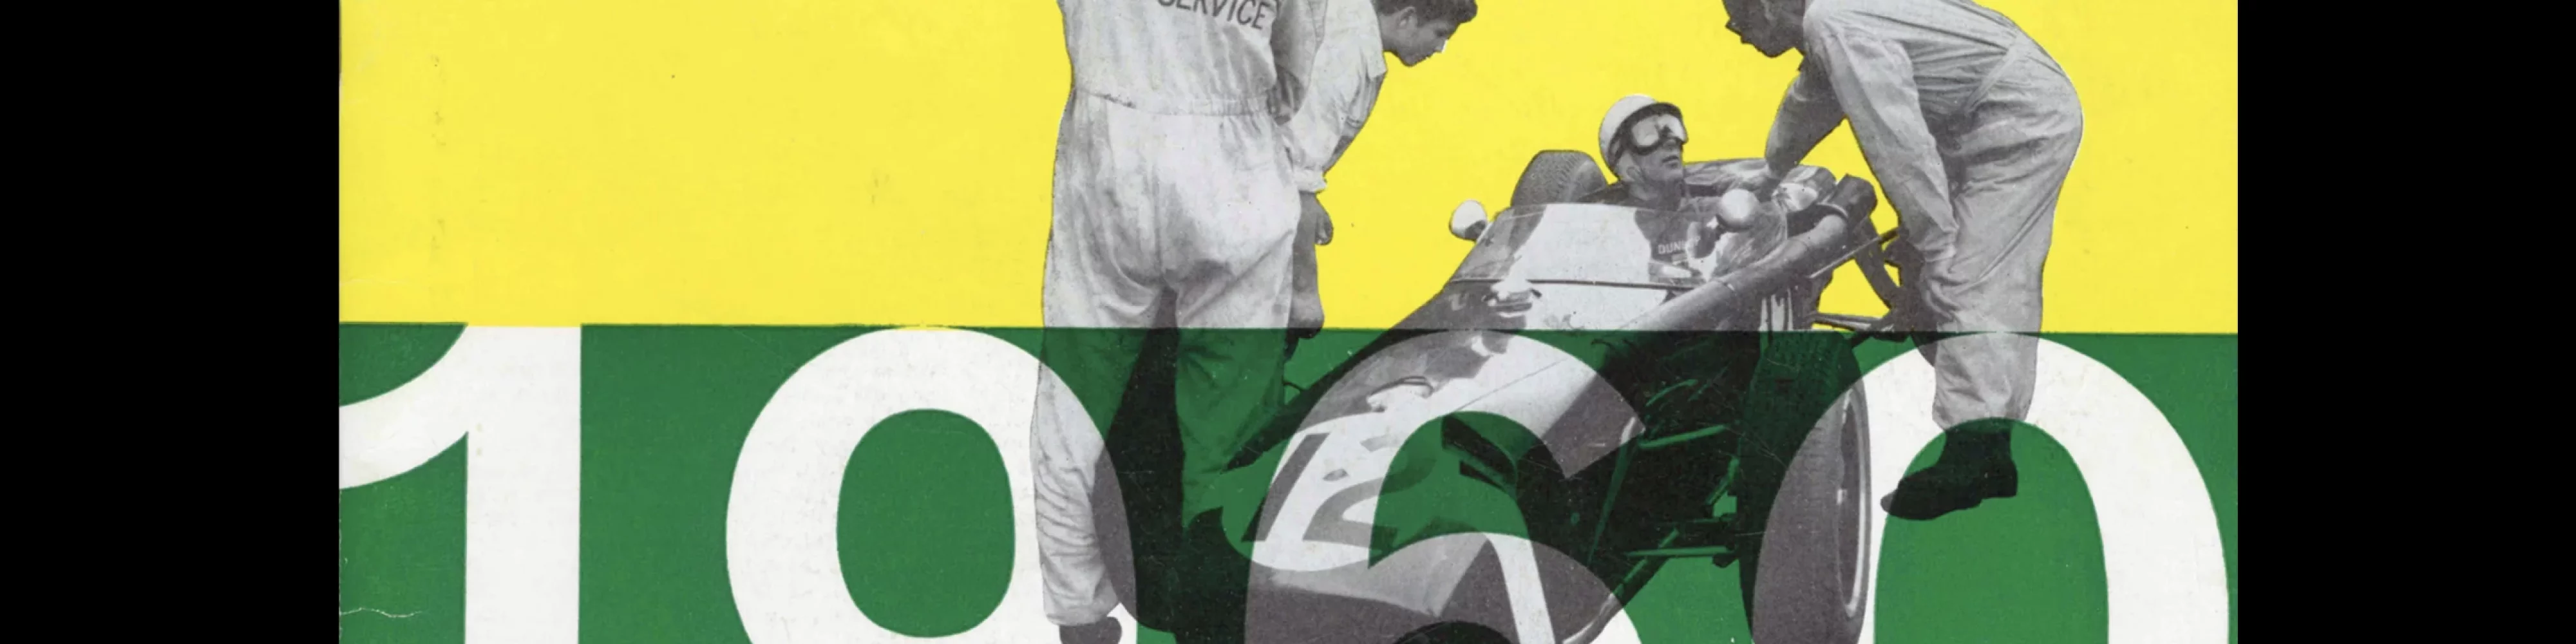 BP Racing '60, BP, 1960. Designed by Newman Neame Limited